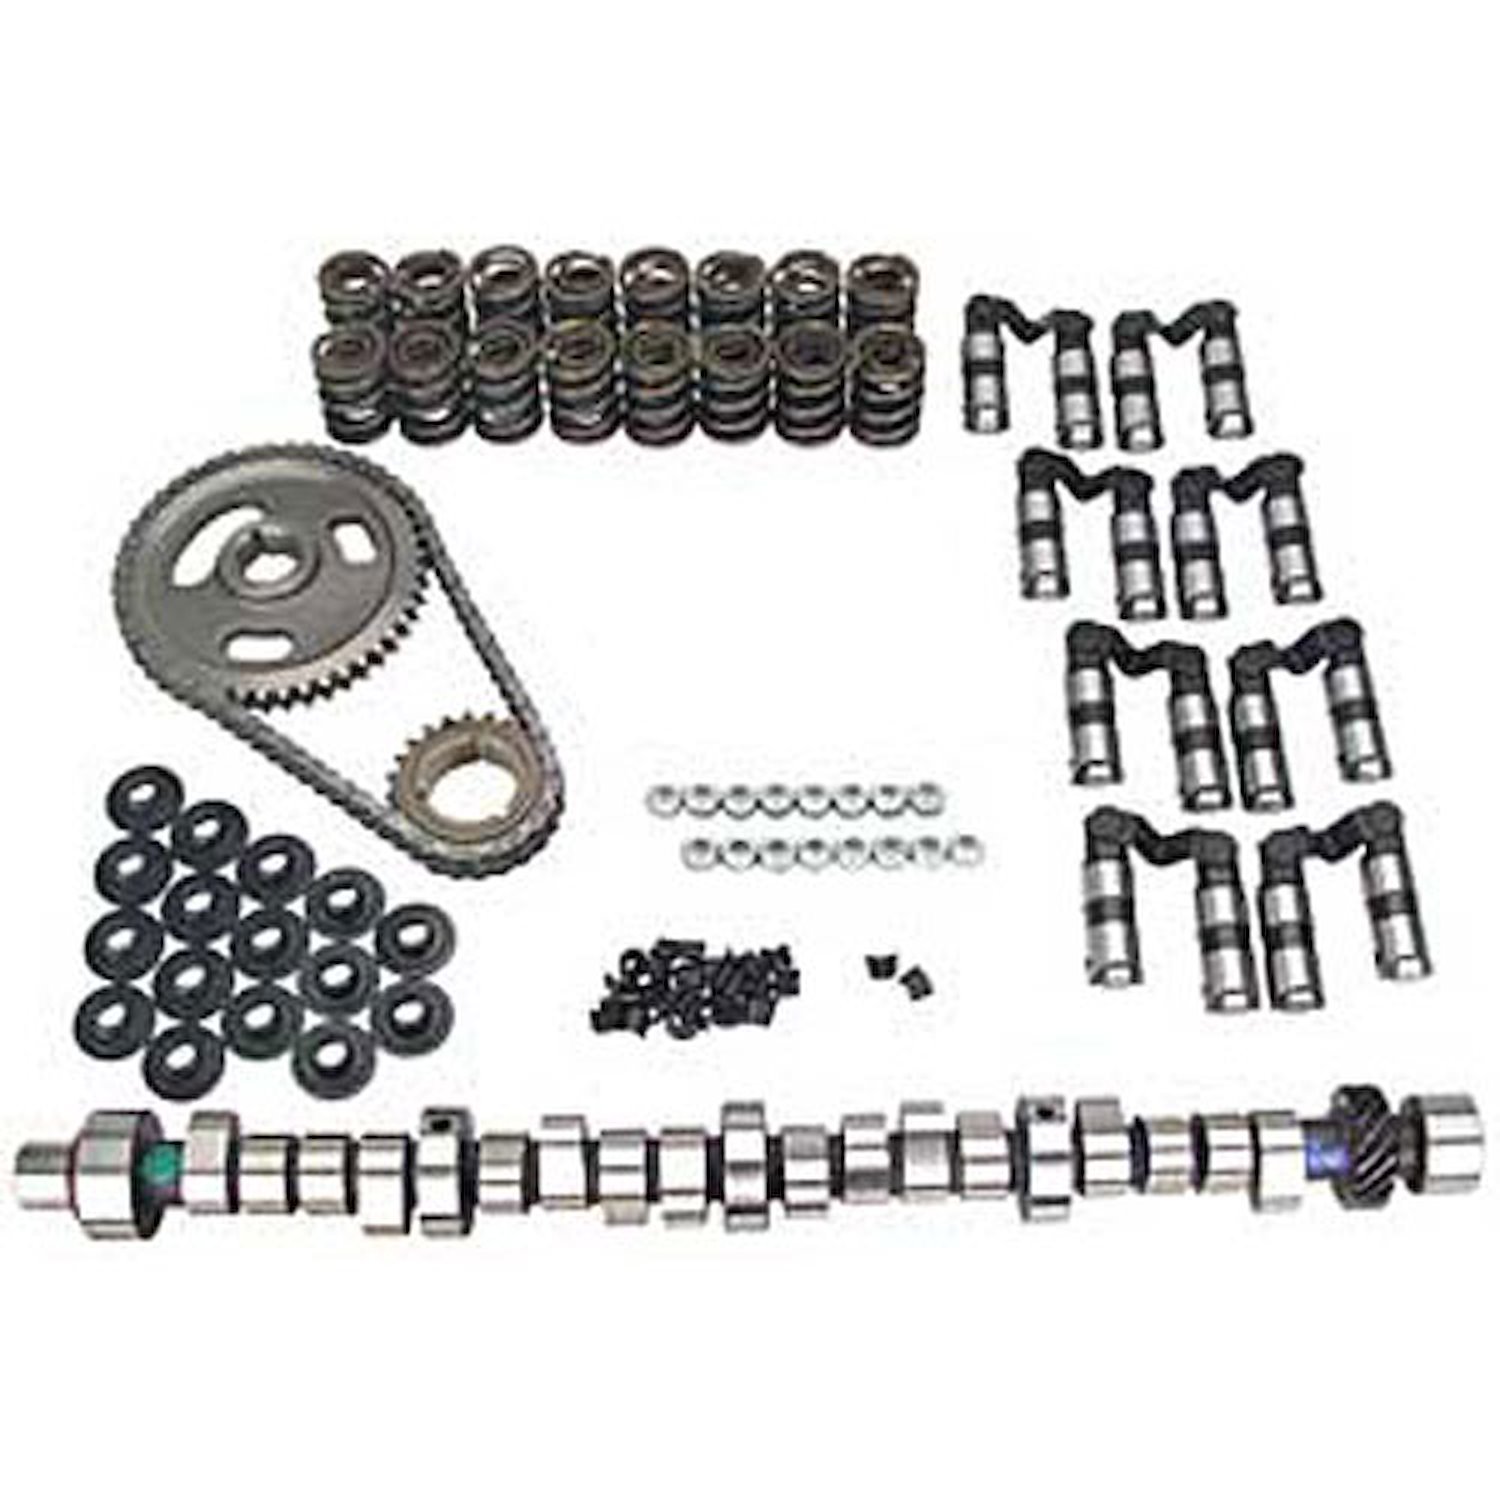 Magnum Mechanical Roller Cam Complete Kit Chevy Small